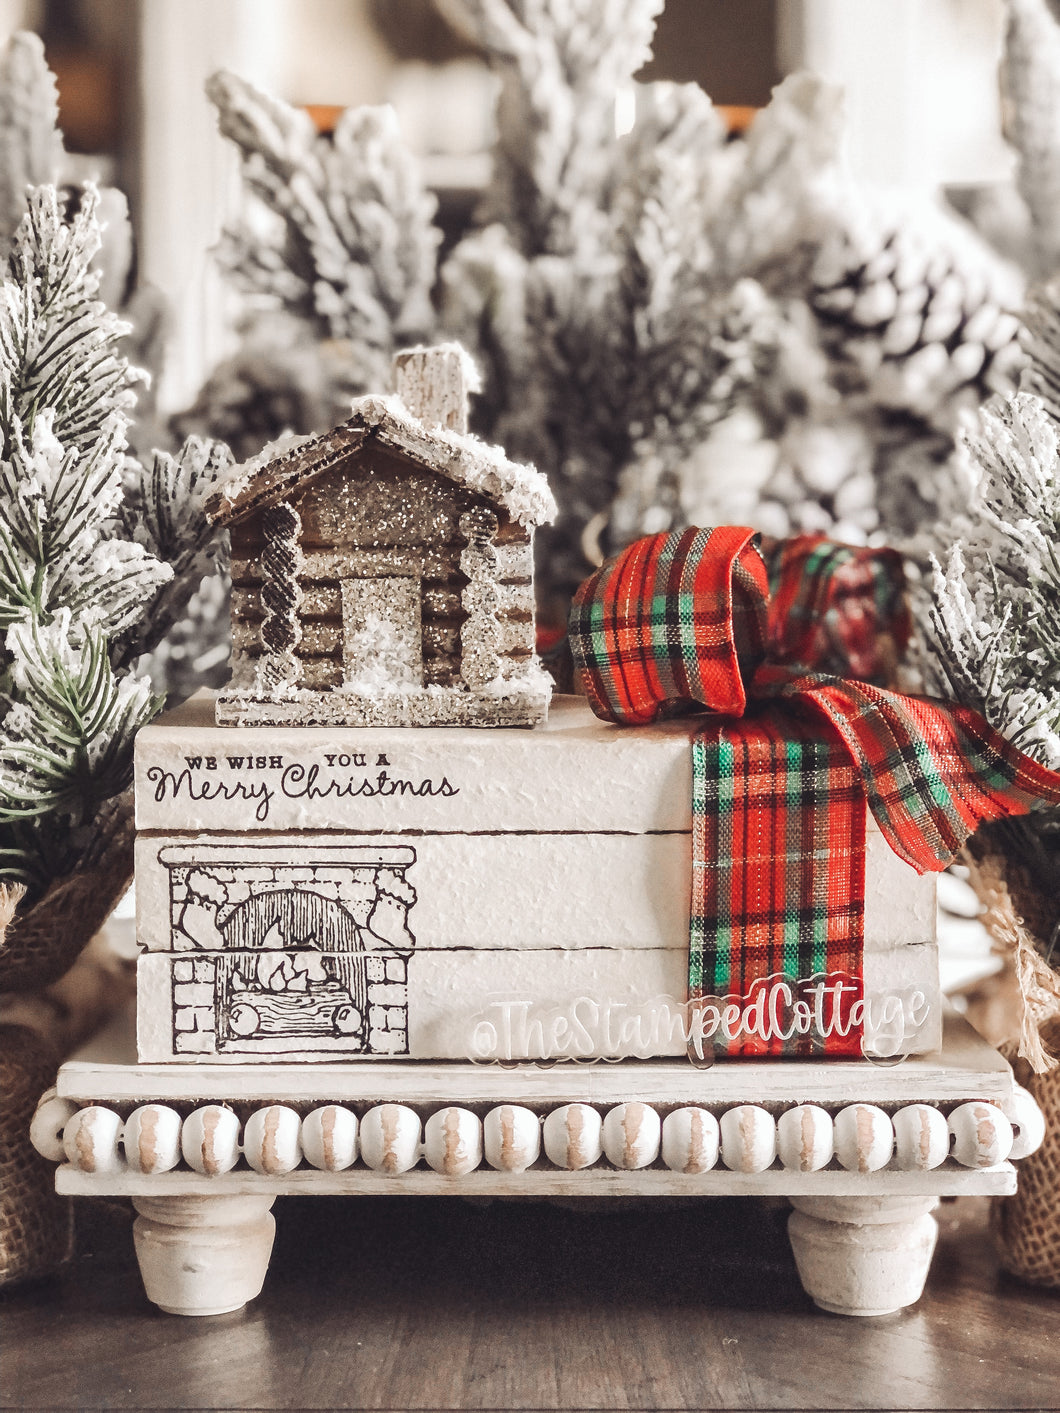 Stamped Book Stack - We wish you a Merry Christmas